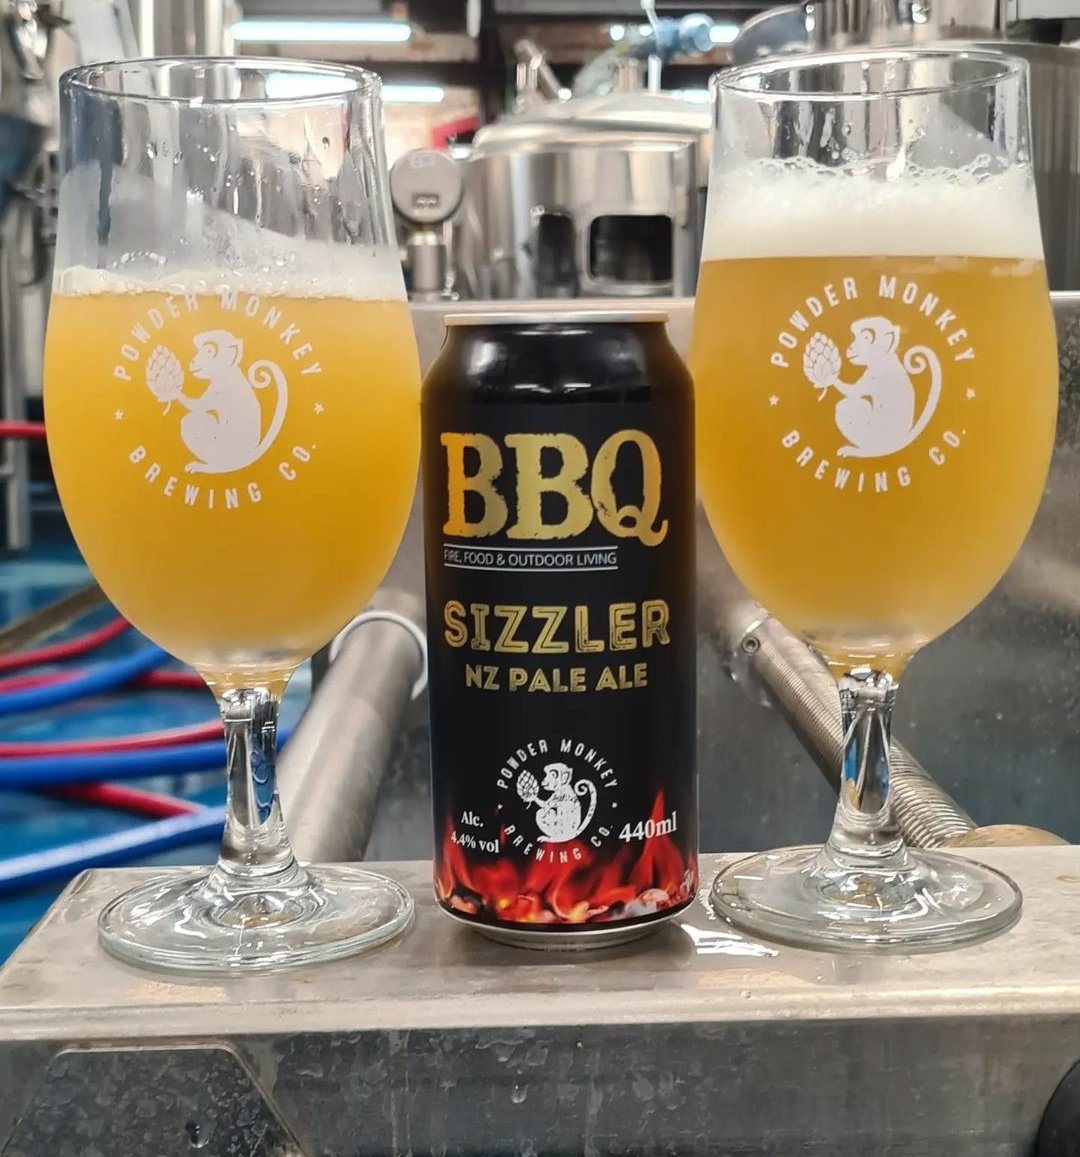 Pre and post filtration. Our collaboration with @thebbqmag 'Sizzler' is looking 👌🐒🍺